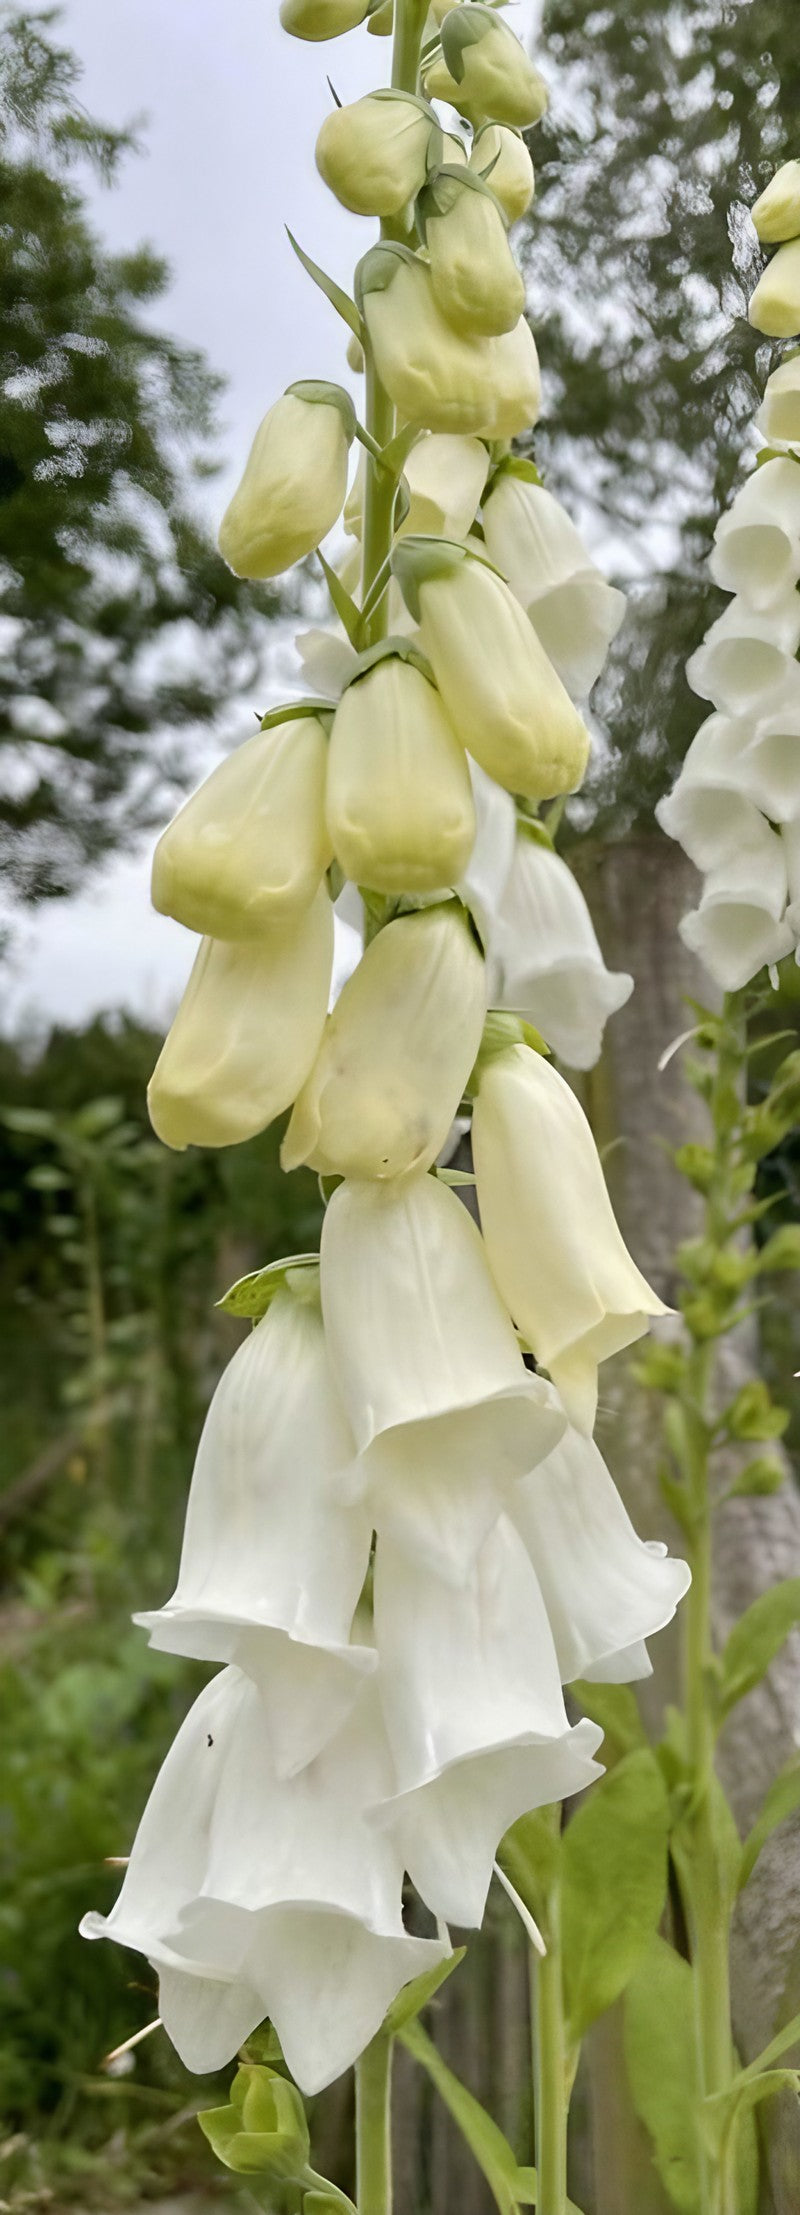 White Foxglove Alba with yellow stamen detail and green leaves